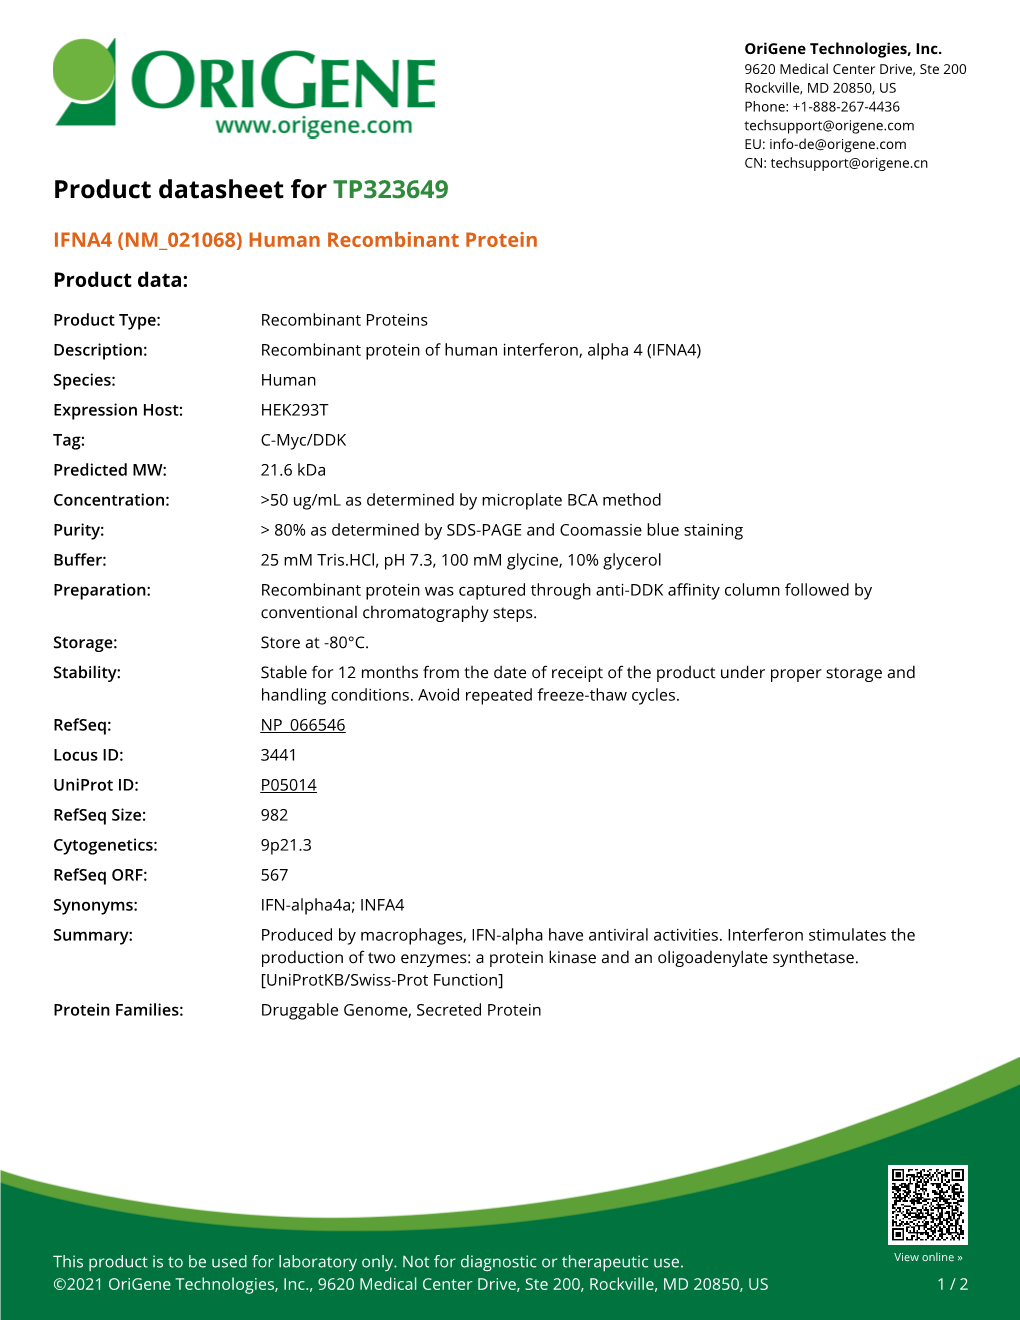 IFNA4 (NM 021068) Human Recombinant Protein Product Data